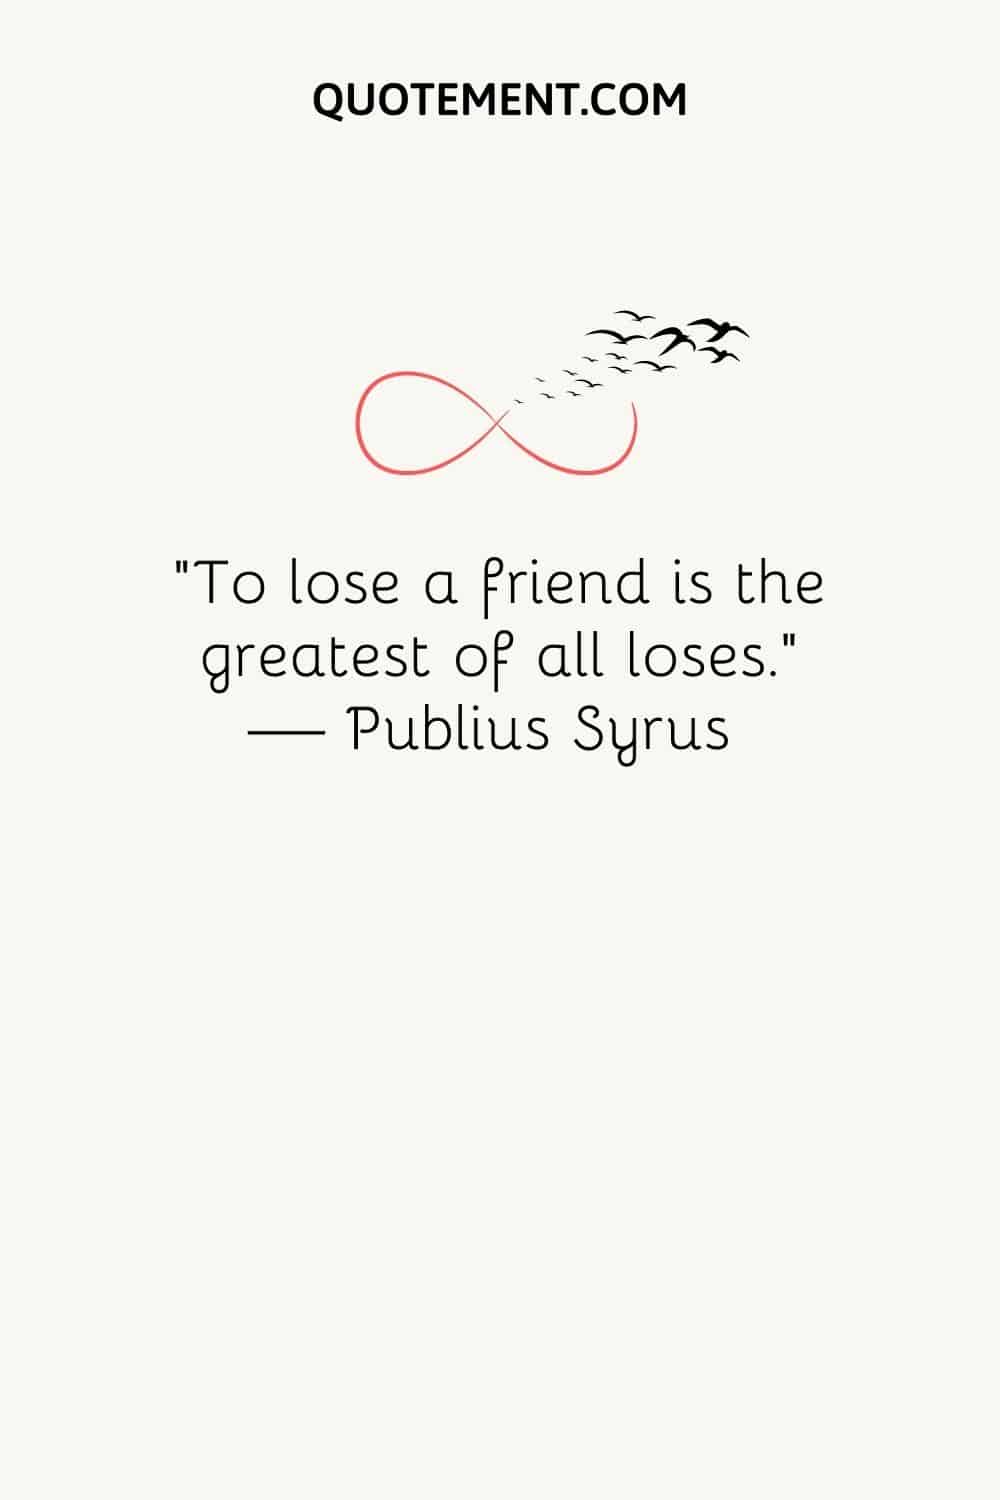 image of the infinity symbol and birds flying representing best losing a friend quote